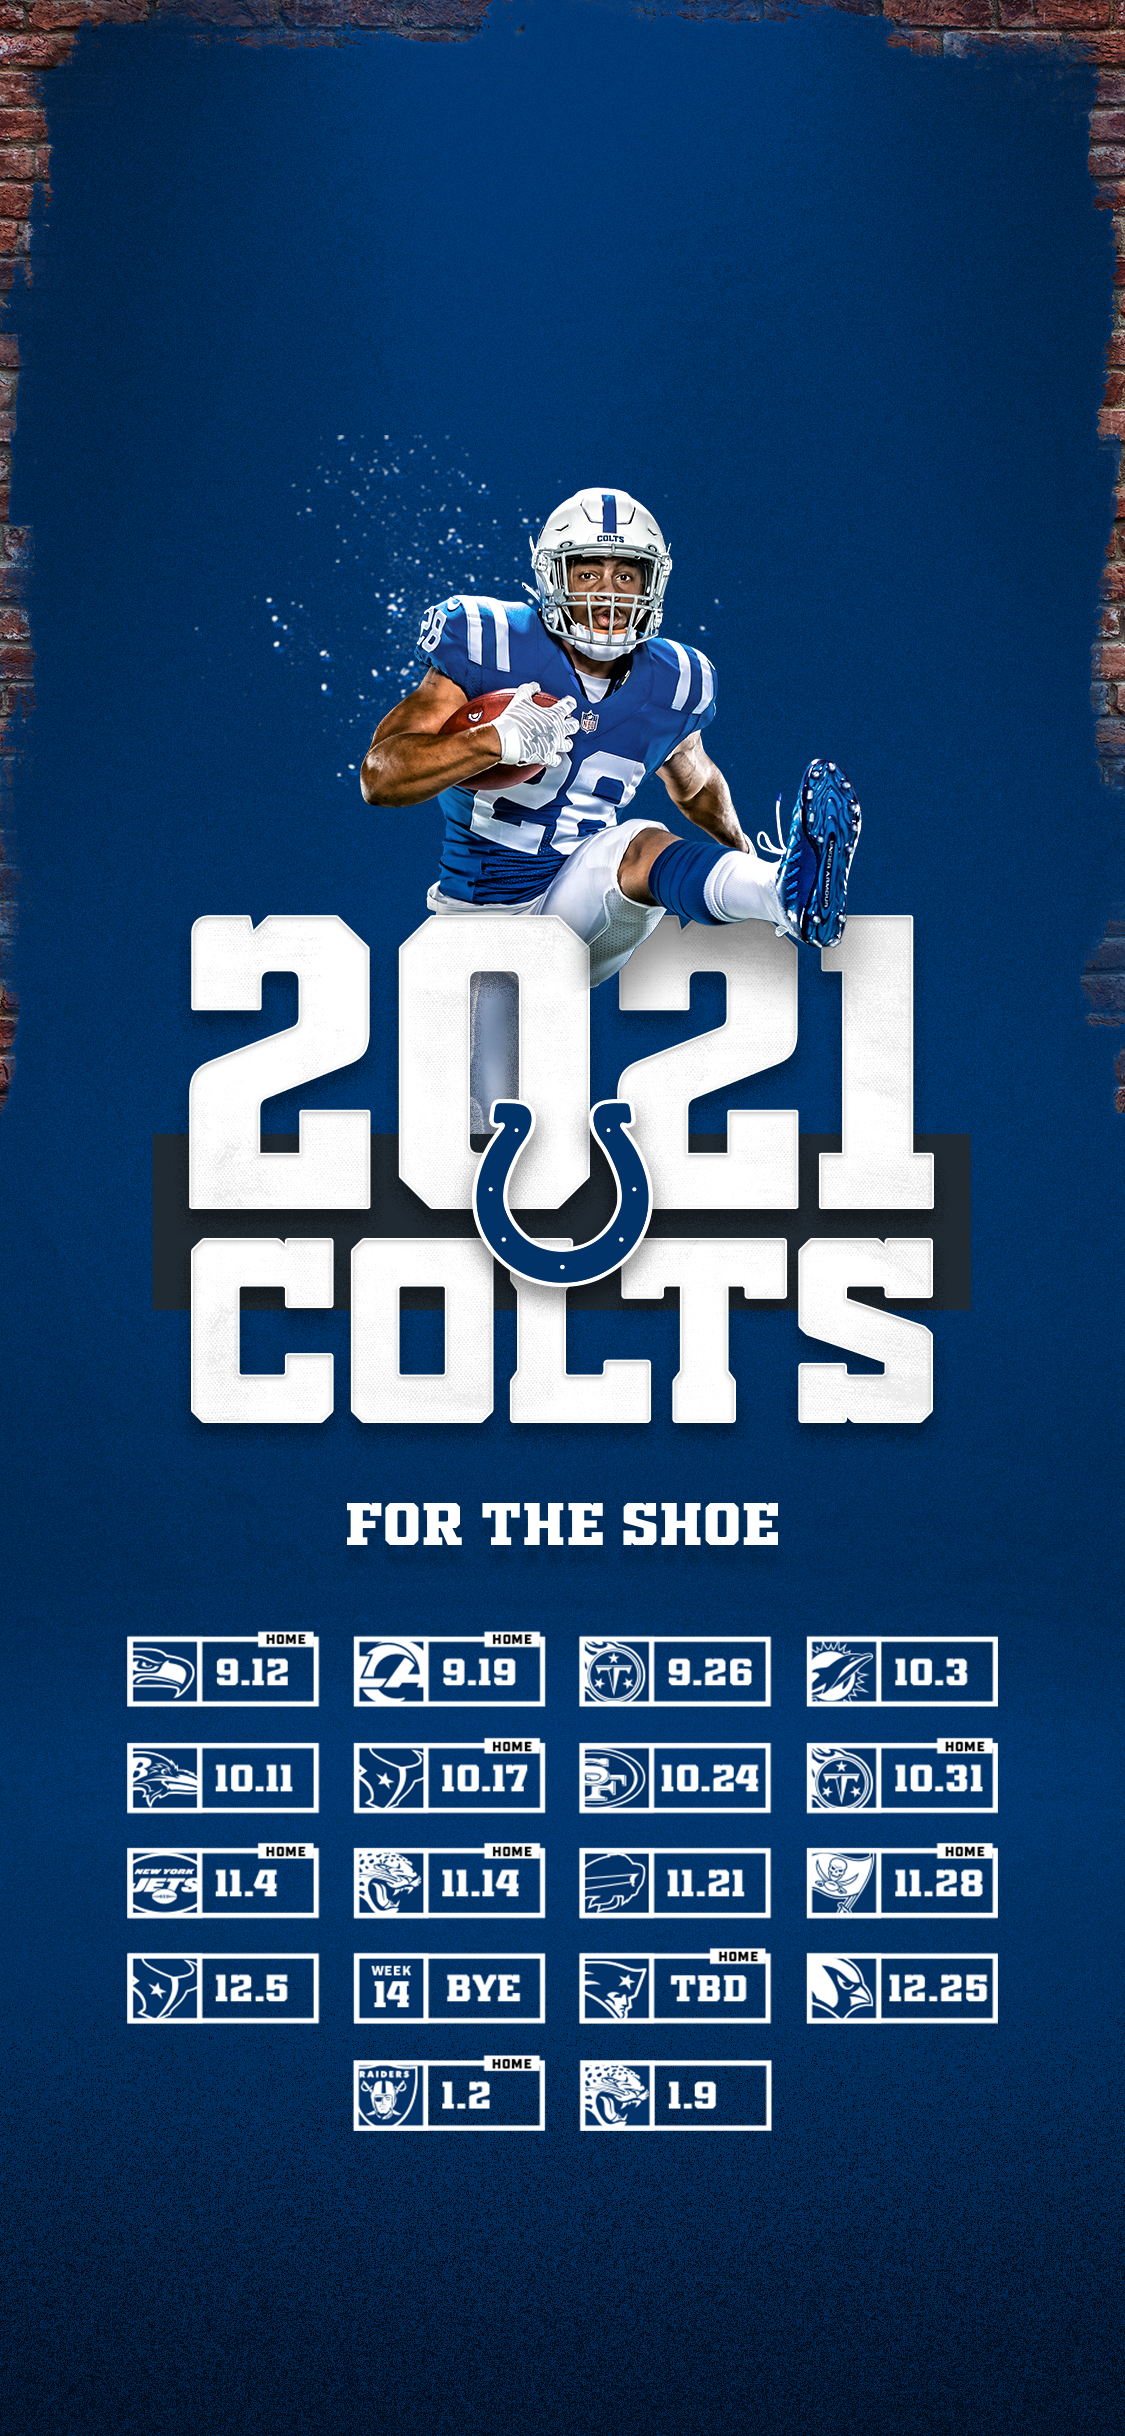 Indianapolis Colts Schedule 2022 Colts Schedule | Indianapolis Colts - Colts.com